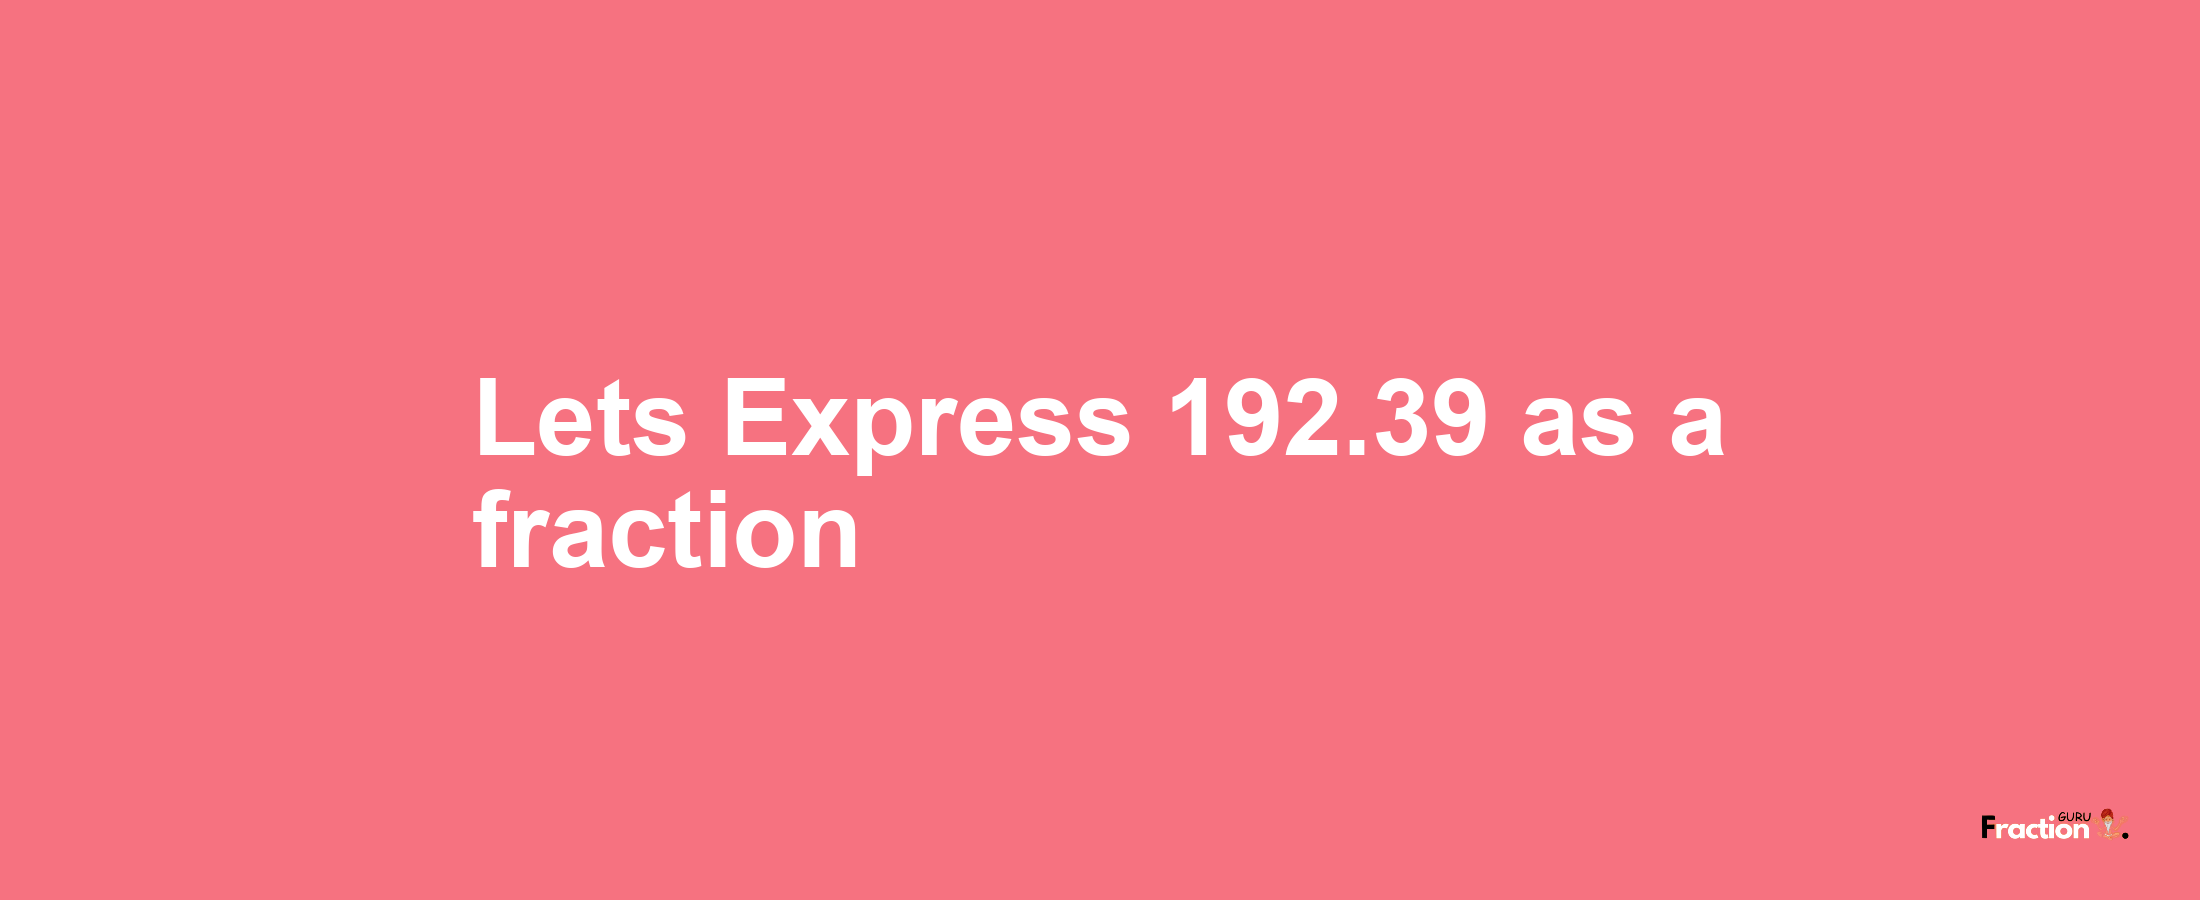 Lets Express 192.39 as afraction